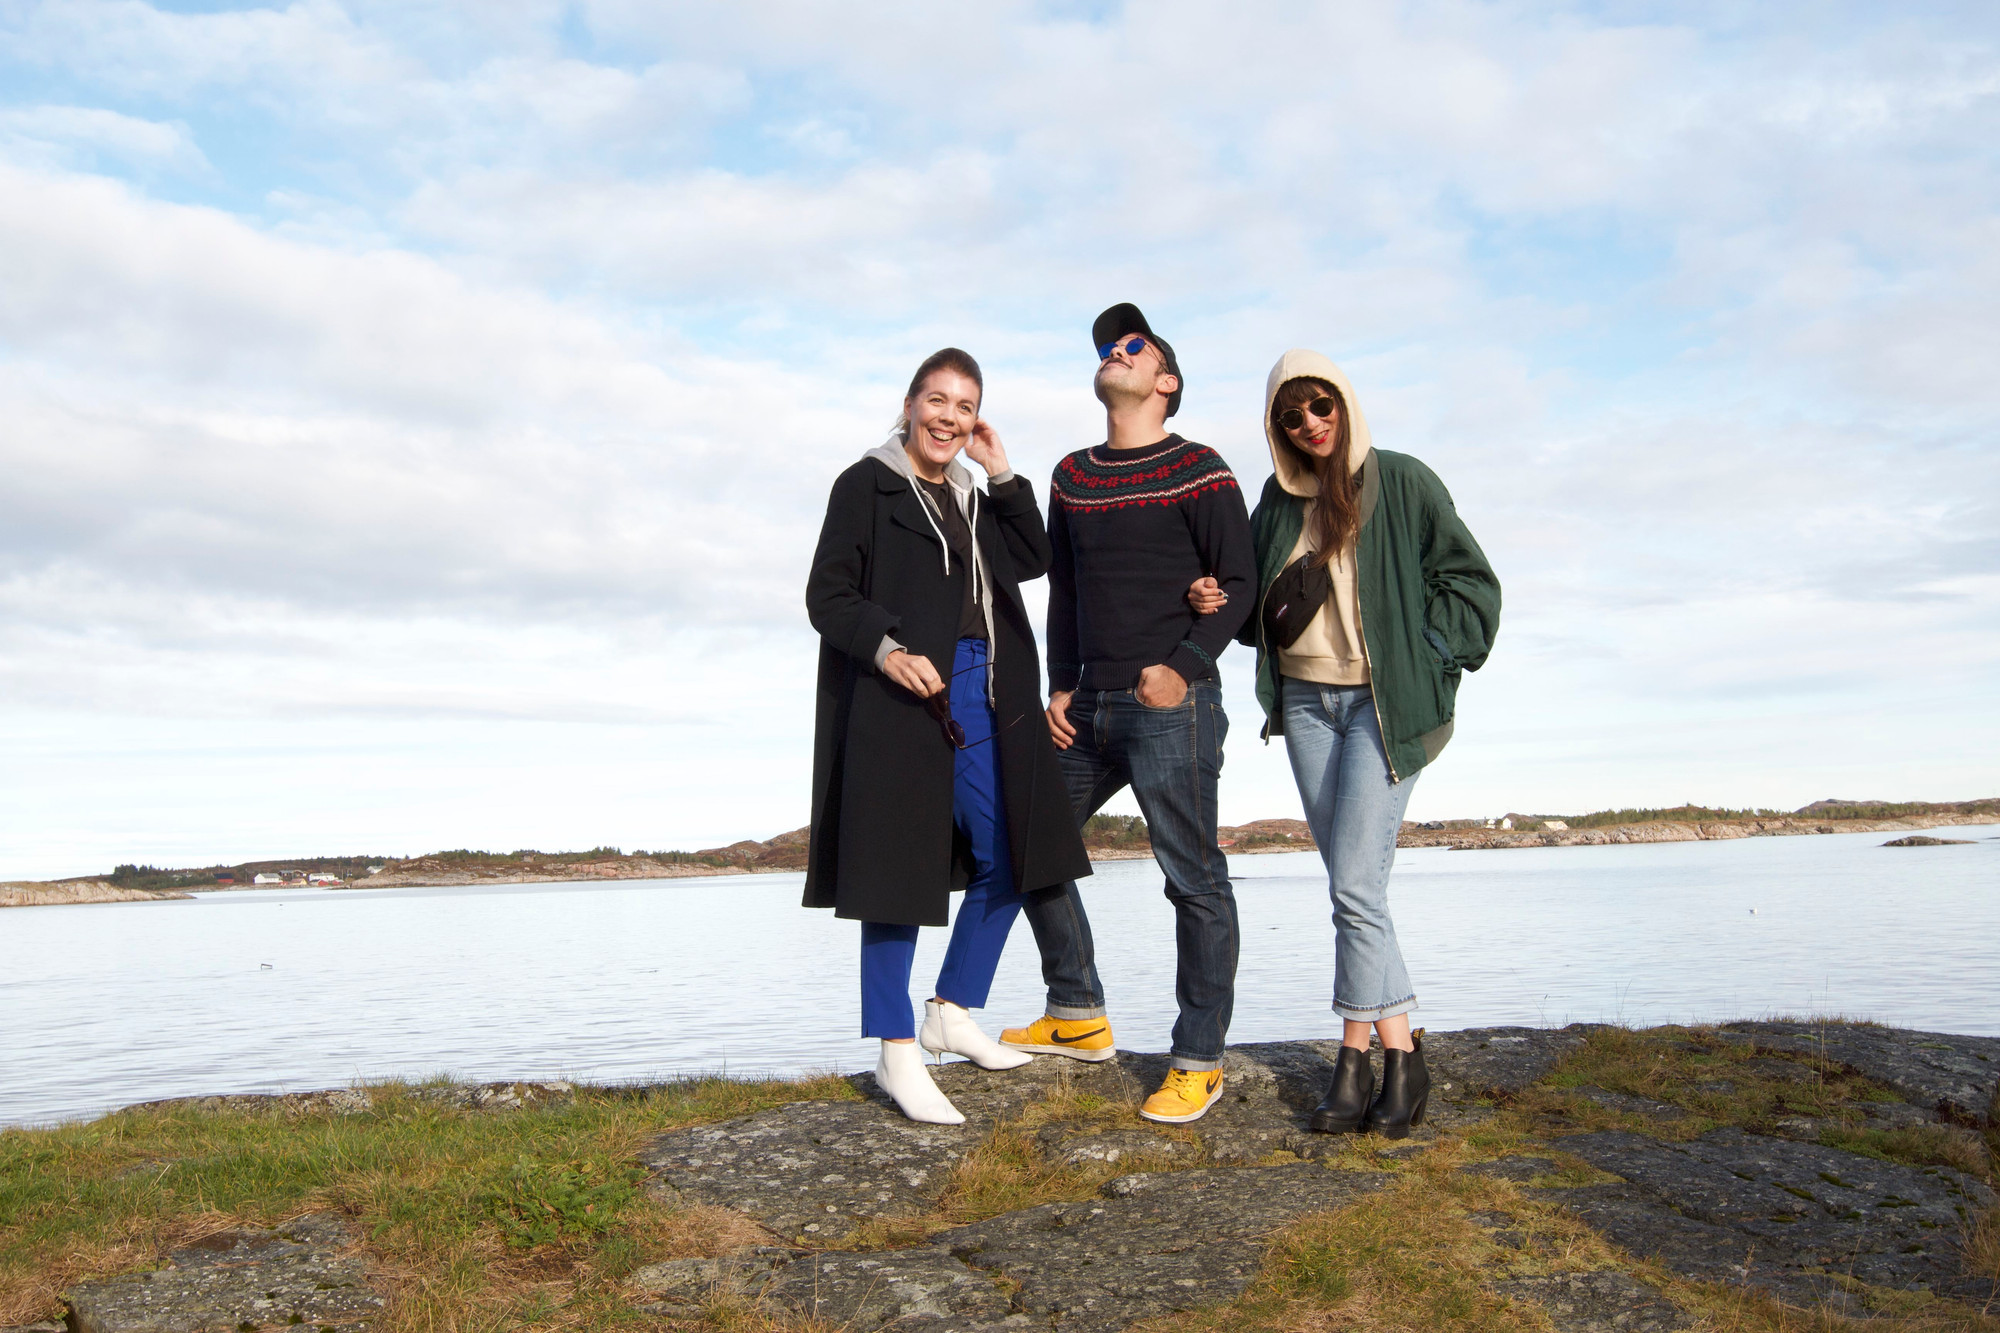 Agnés Violau, Leo Marin and Aurélie Faure arriving at Håholmen in 2019, as the winners of our first Open Call with C-E-A in 2019. Photo: Kobie Nel.